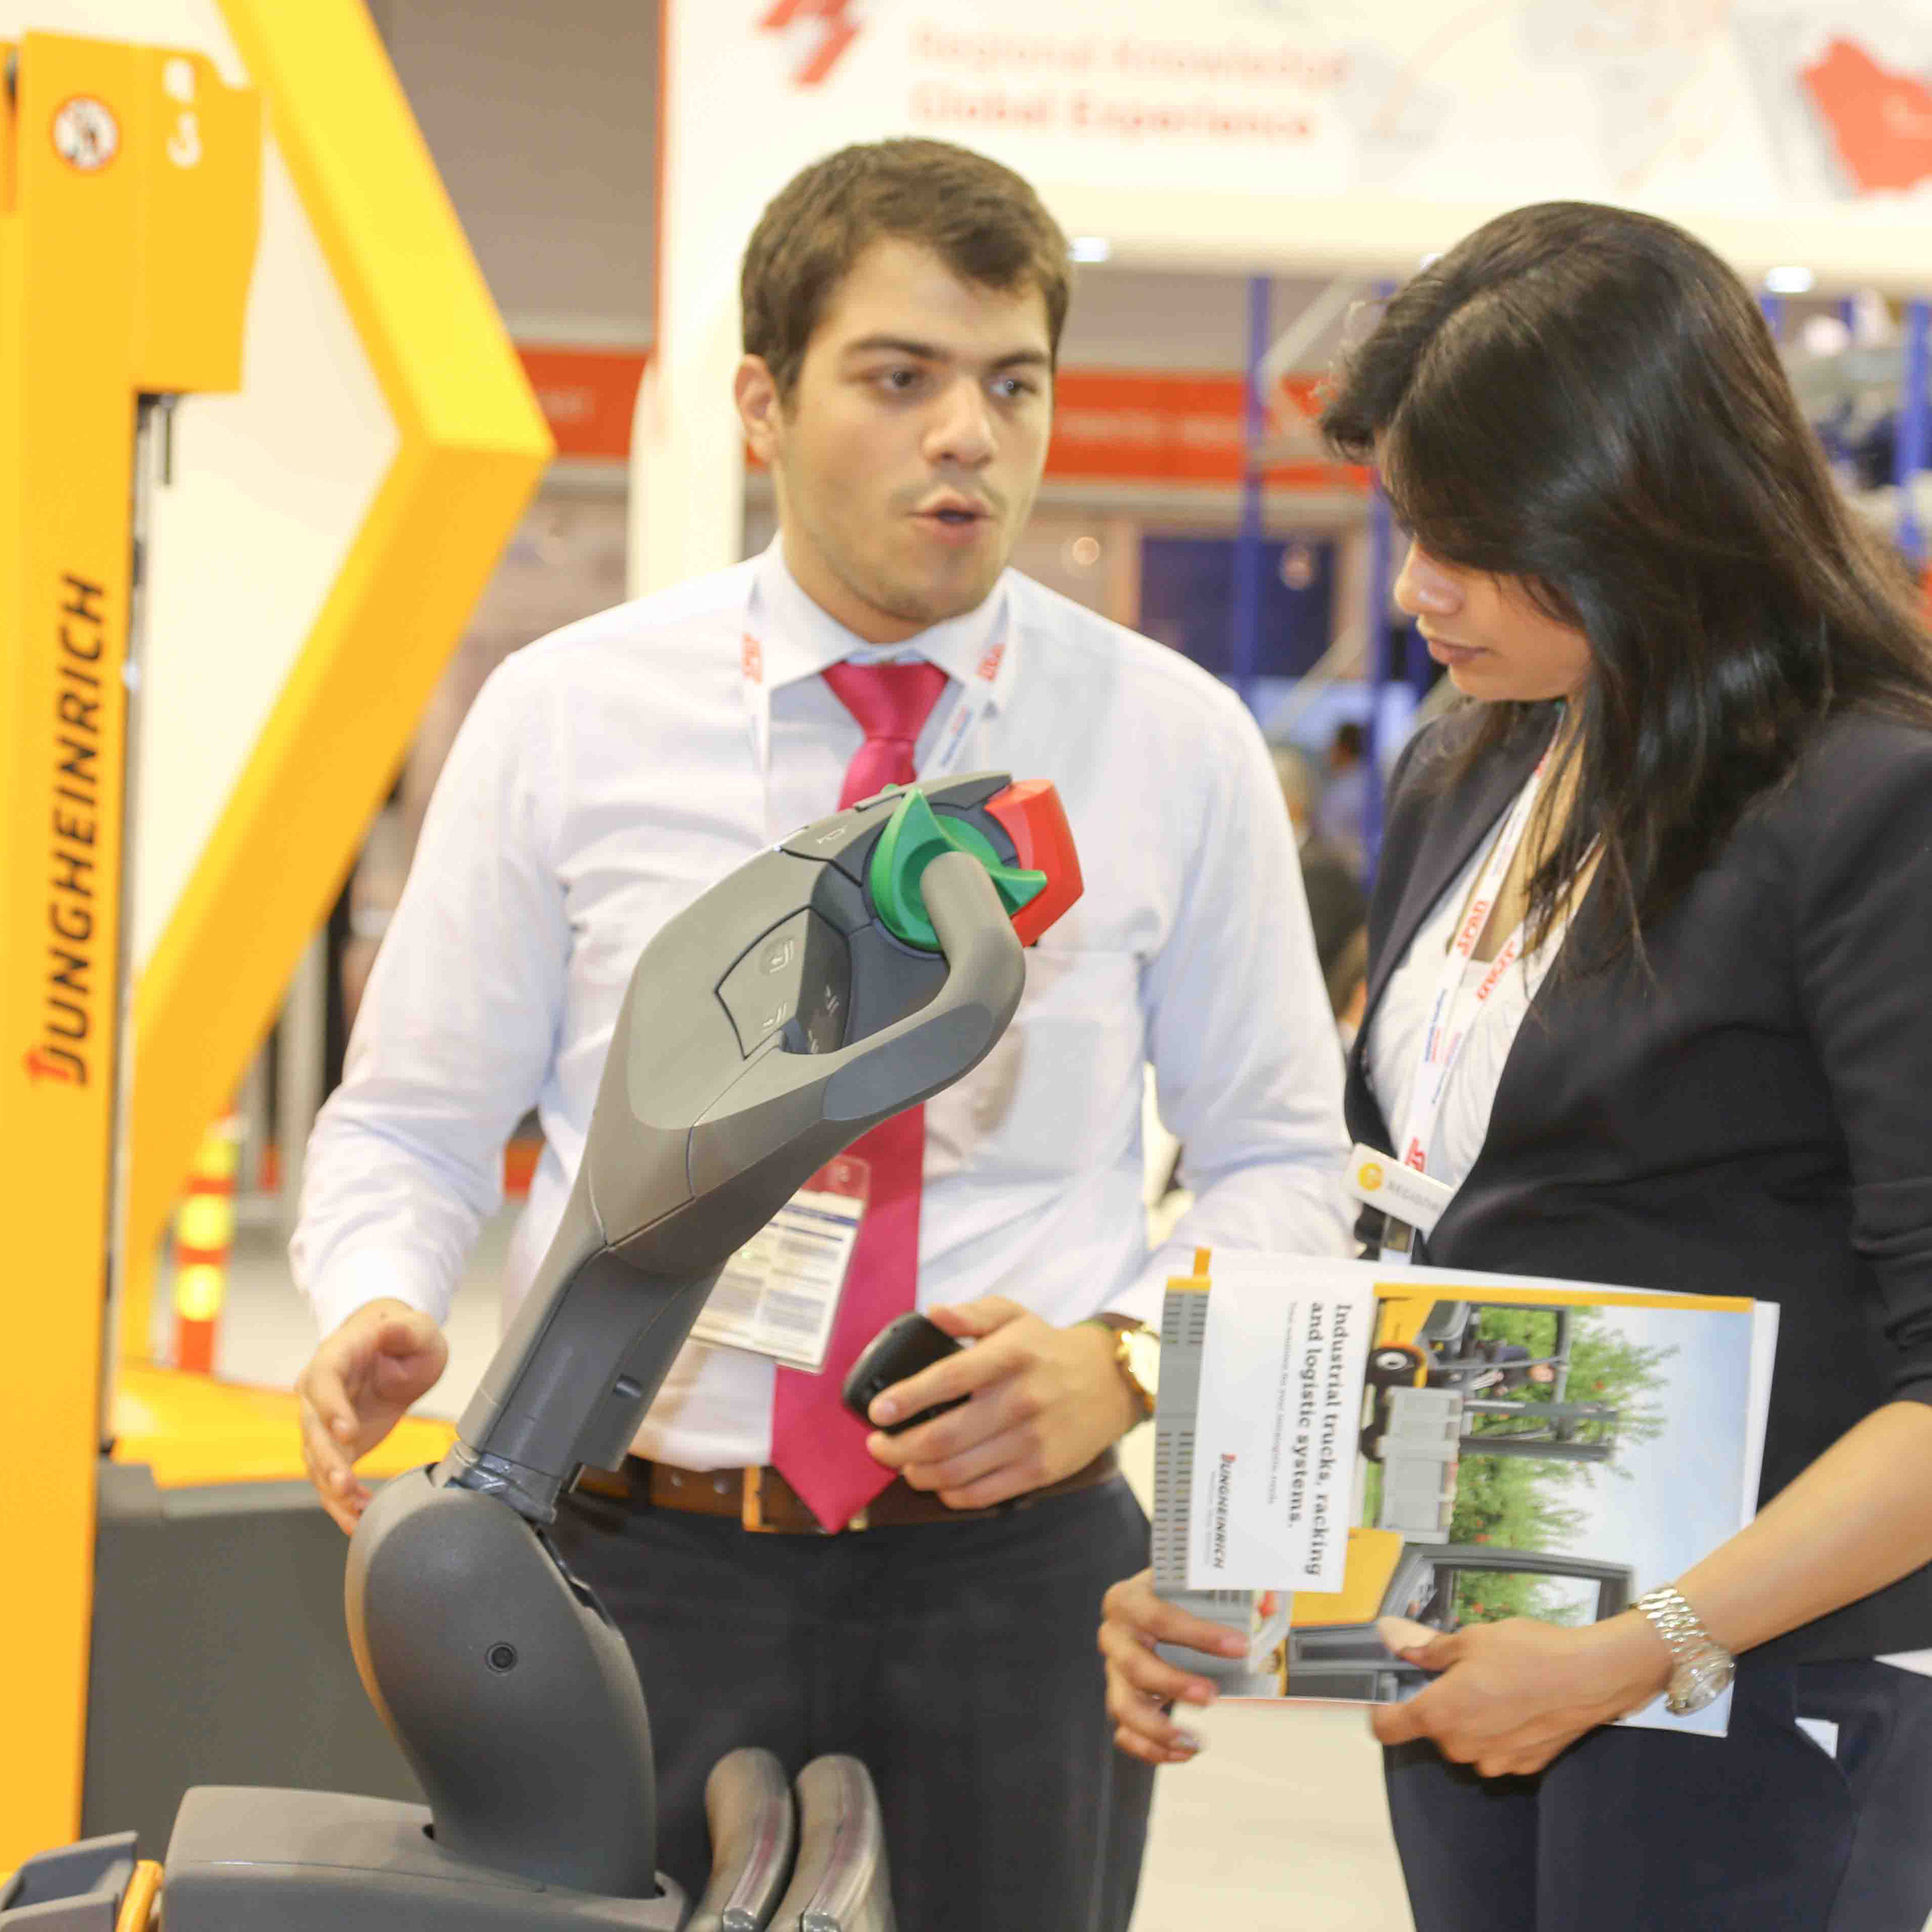 Materials Handling Middle East - Automation and Industry 4.0 among central themes solving key challenges at Materials Handling Middle East 2017